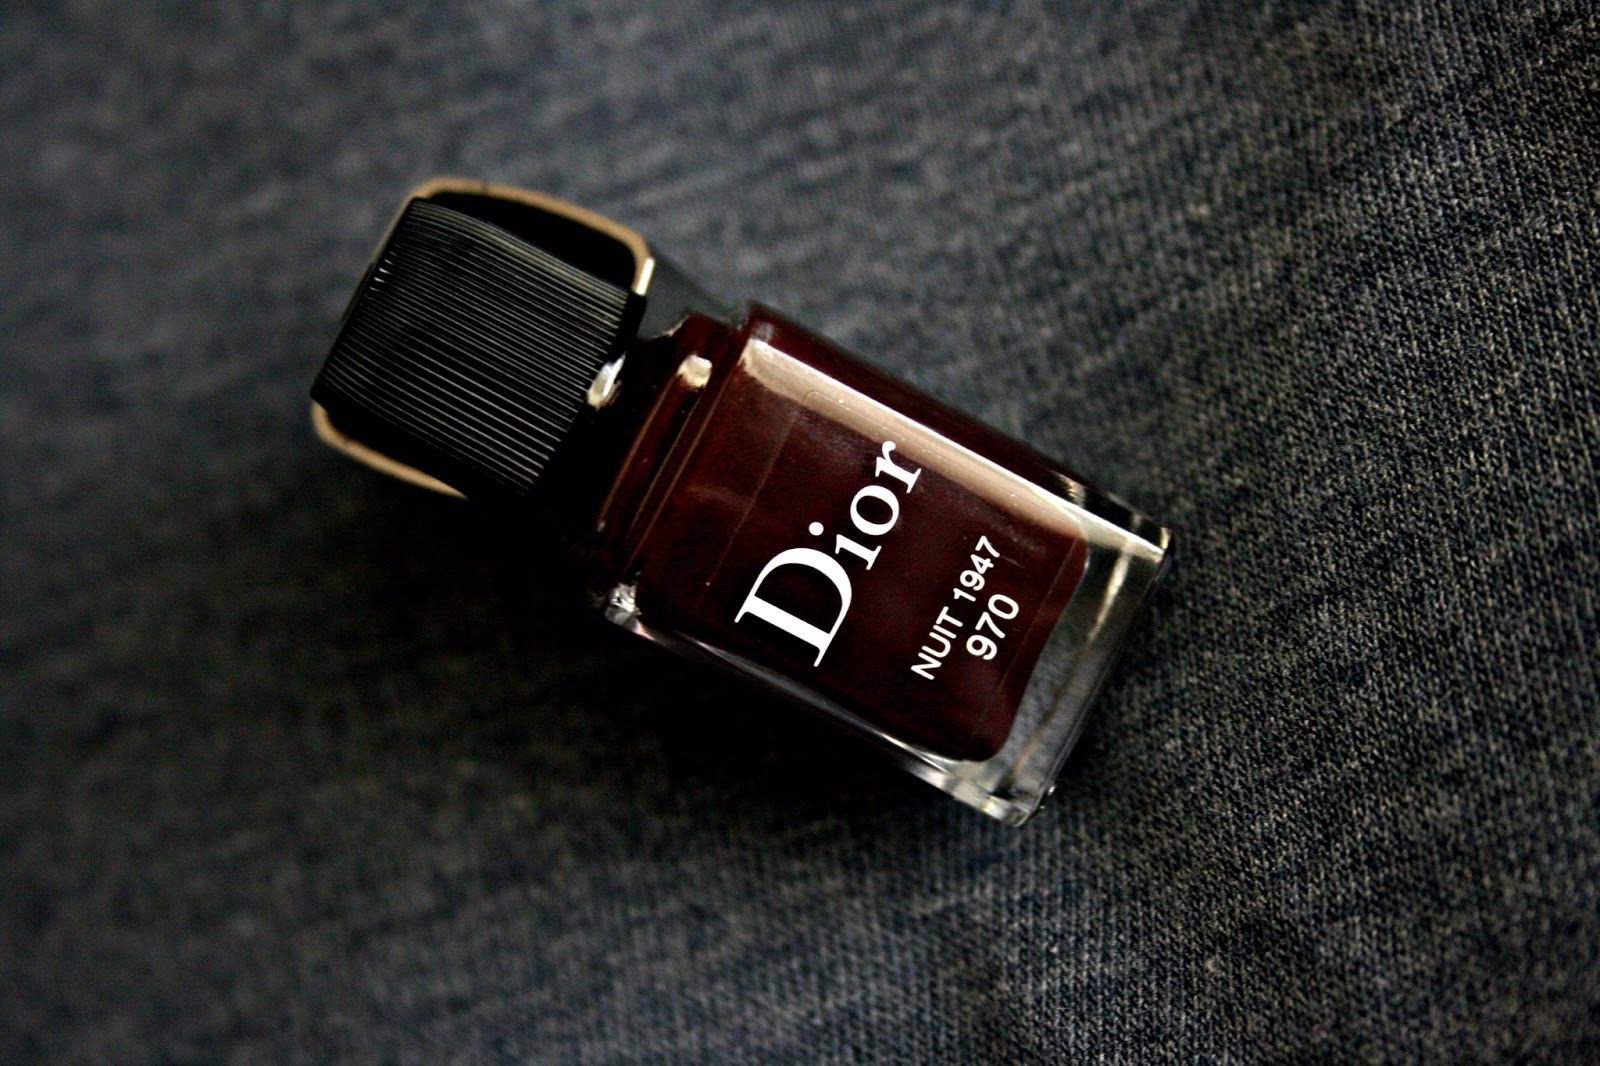 Dior Vernis Gel Shine and Long Wear Nail Lacquer in Nuit 1947 970 Review, Photos, Swatches